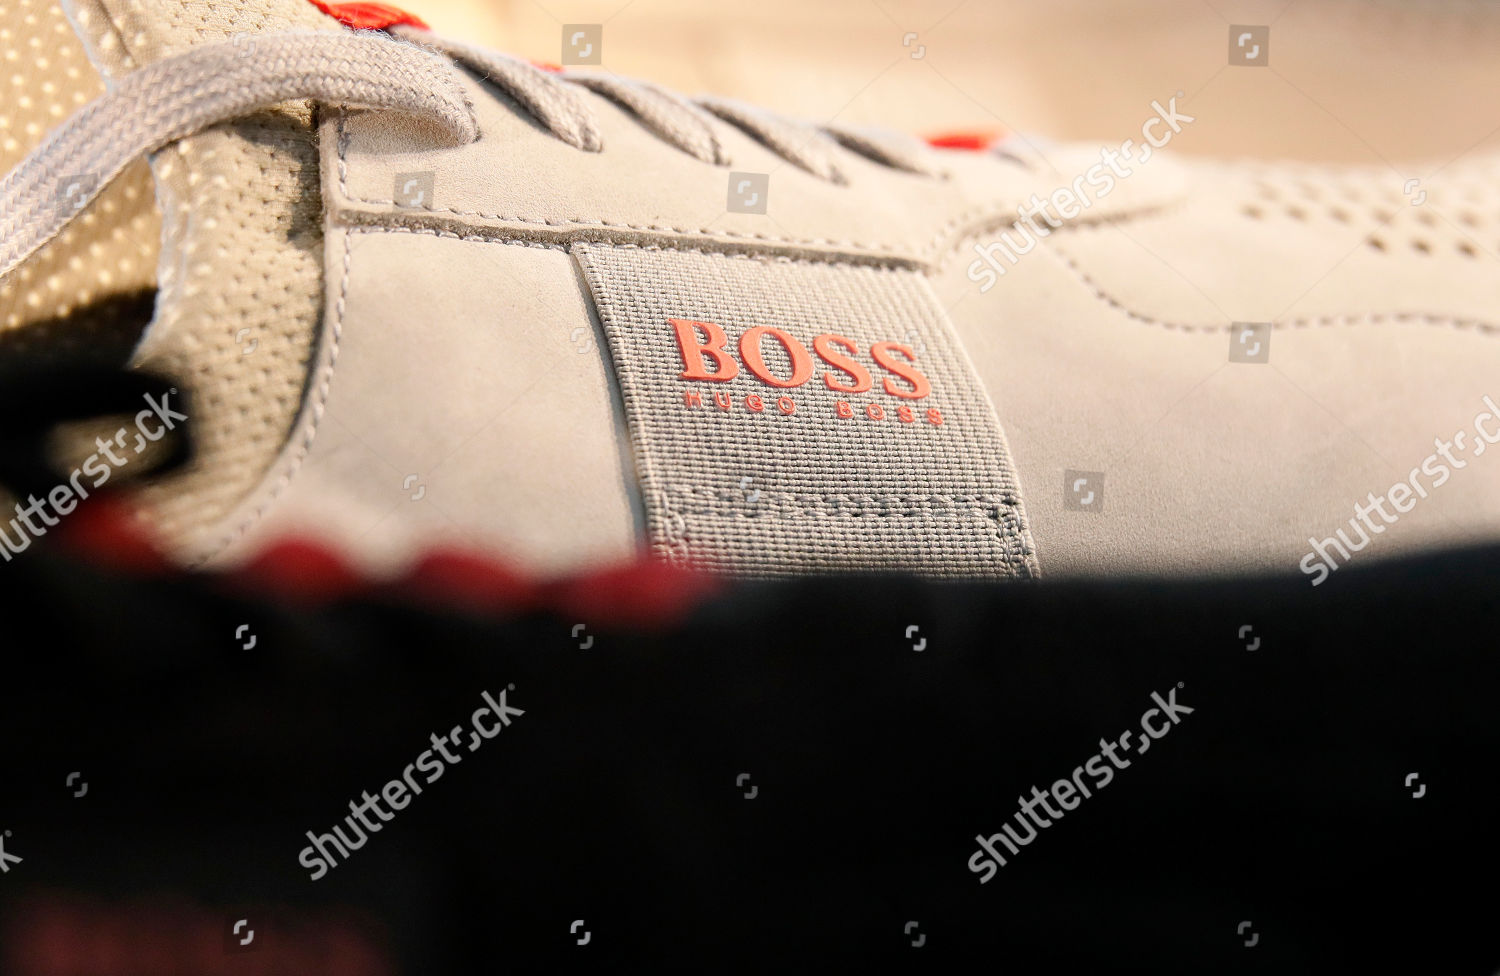 boss shoes stock